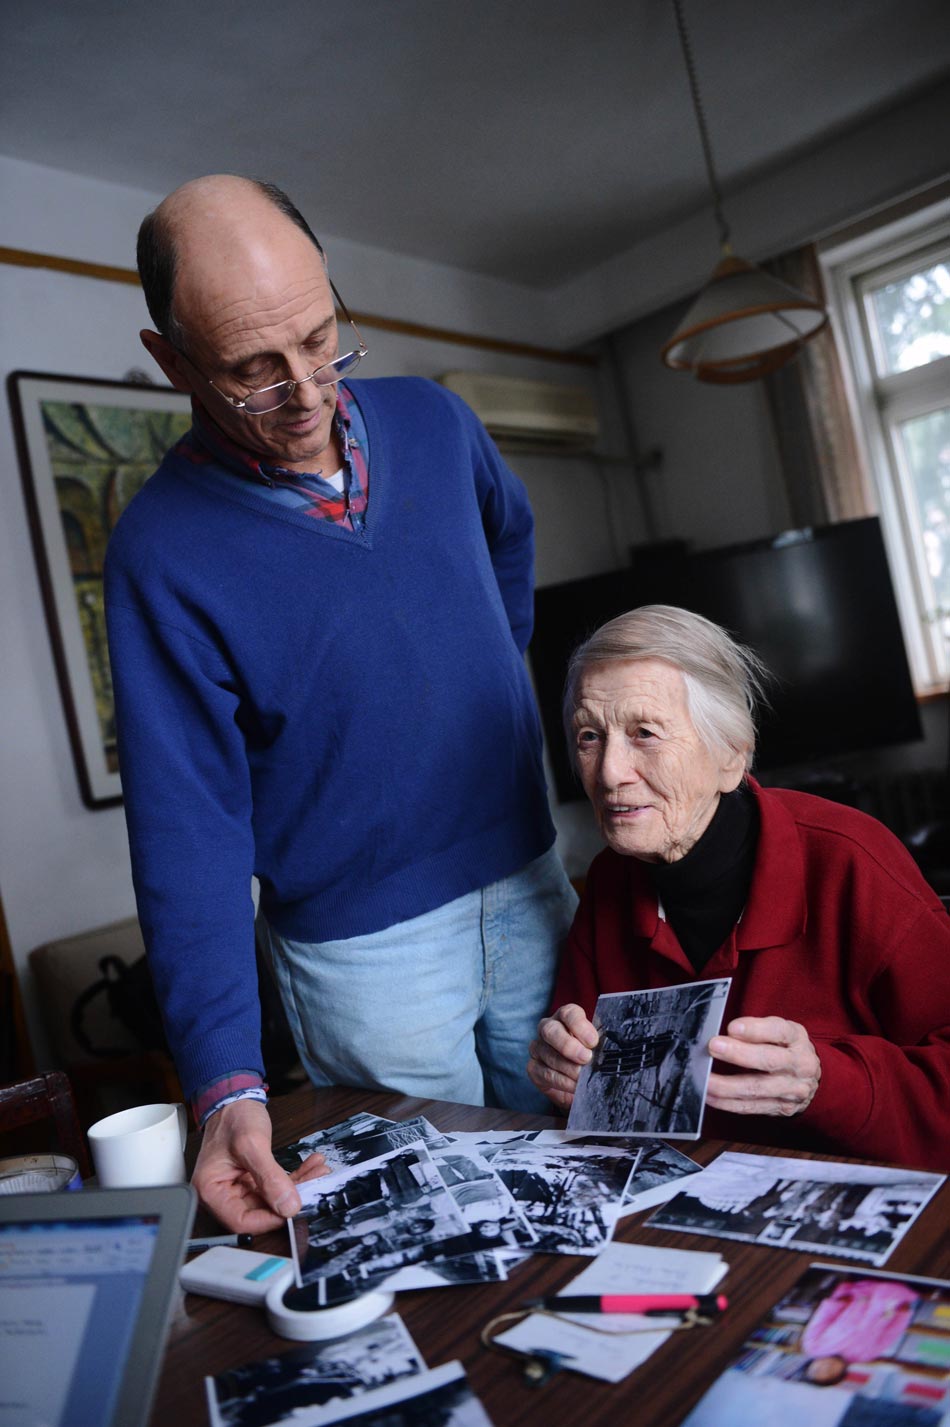 97-year-old Isabel Crook looks at her photos with her son on Dec. 14, 2012.(Photo/Xinhua)